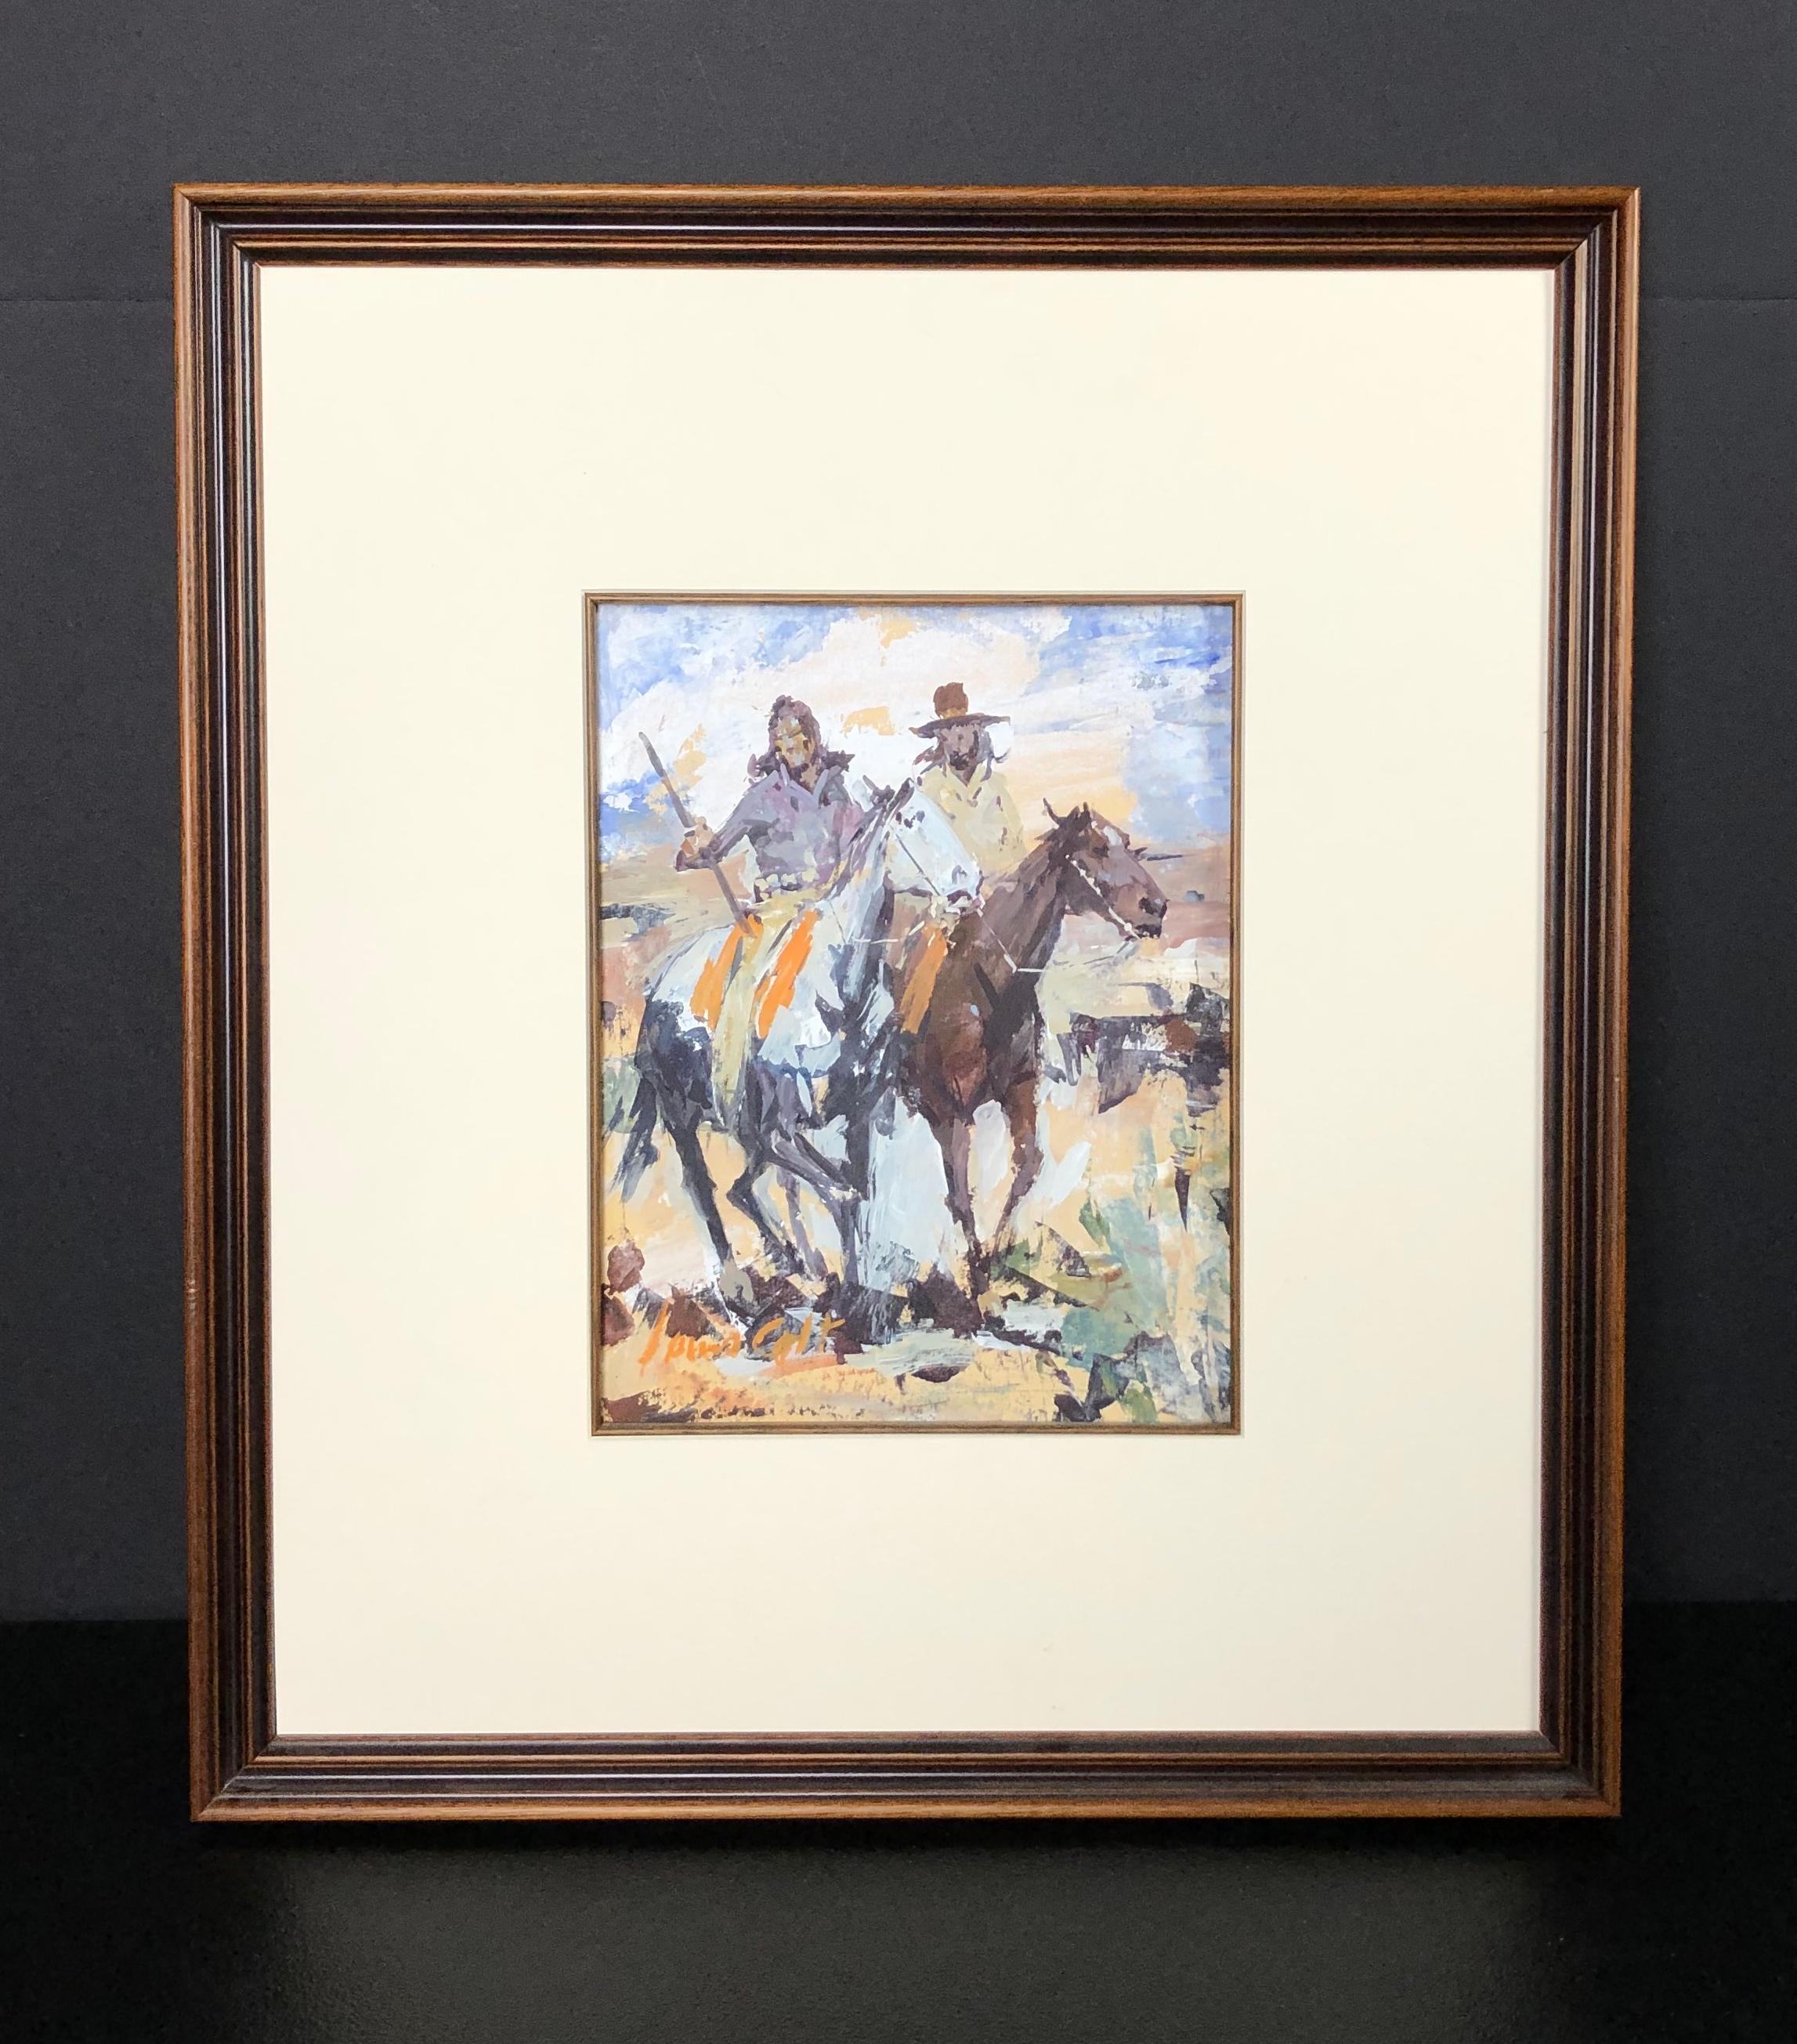 Western artist James Lee Colt (1922-2005) California
Original signed gouache watercolor painting featuring western scene.
Cowboy and Indian mounted on horse back.
Signed lower left. James Lee Colt (1922-2005)Palm Springs Back of frame has mounted